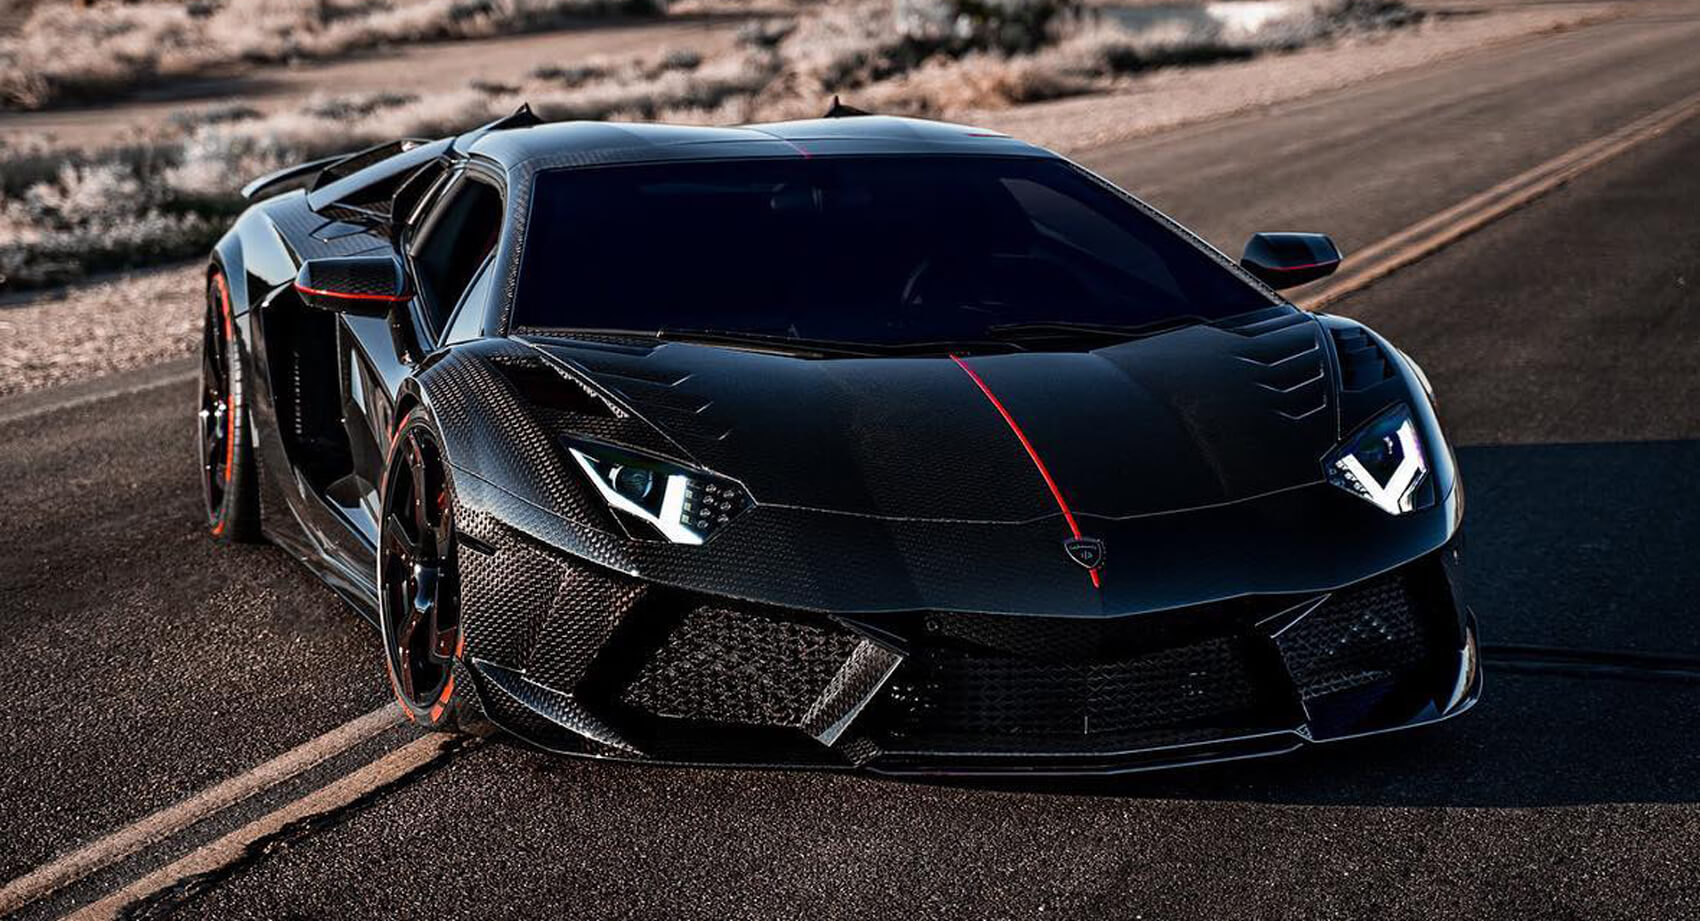 Mansory Carbonado Is A Flashy Lamborghini Aventador S Roadster With A Matching Price Tag Carscoops